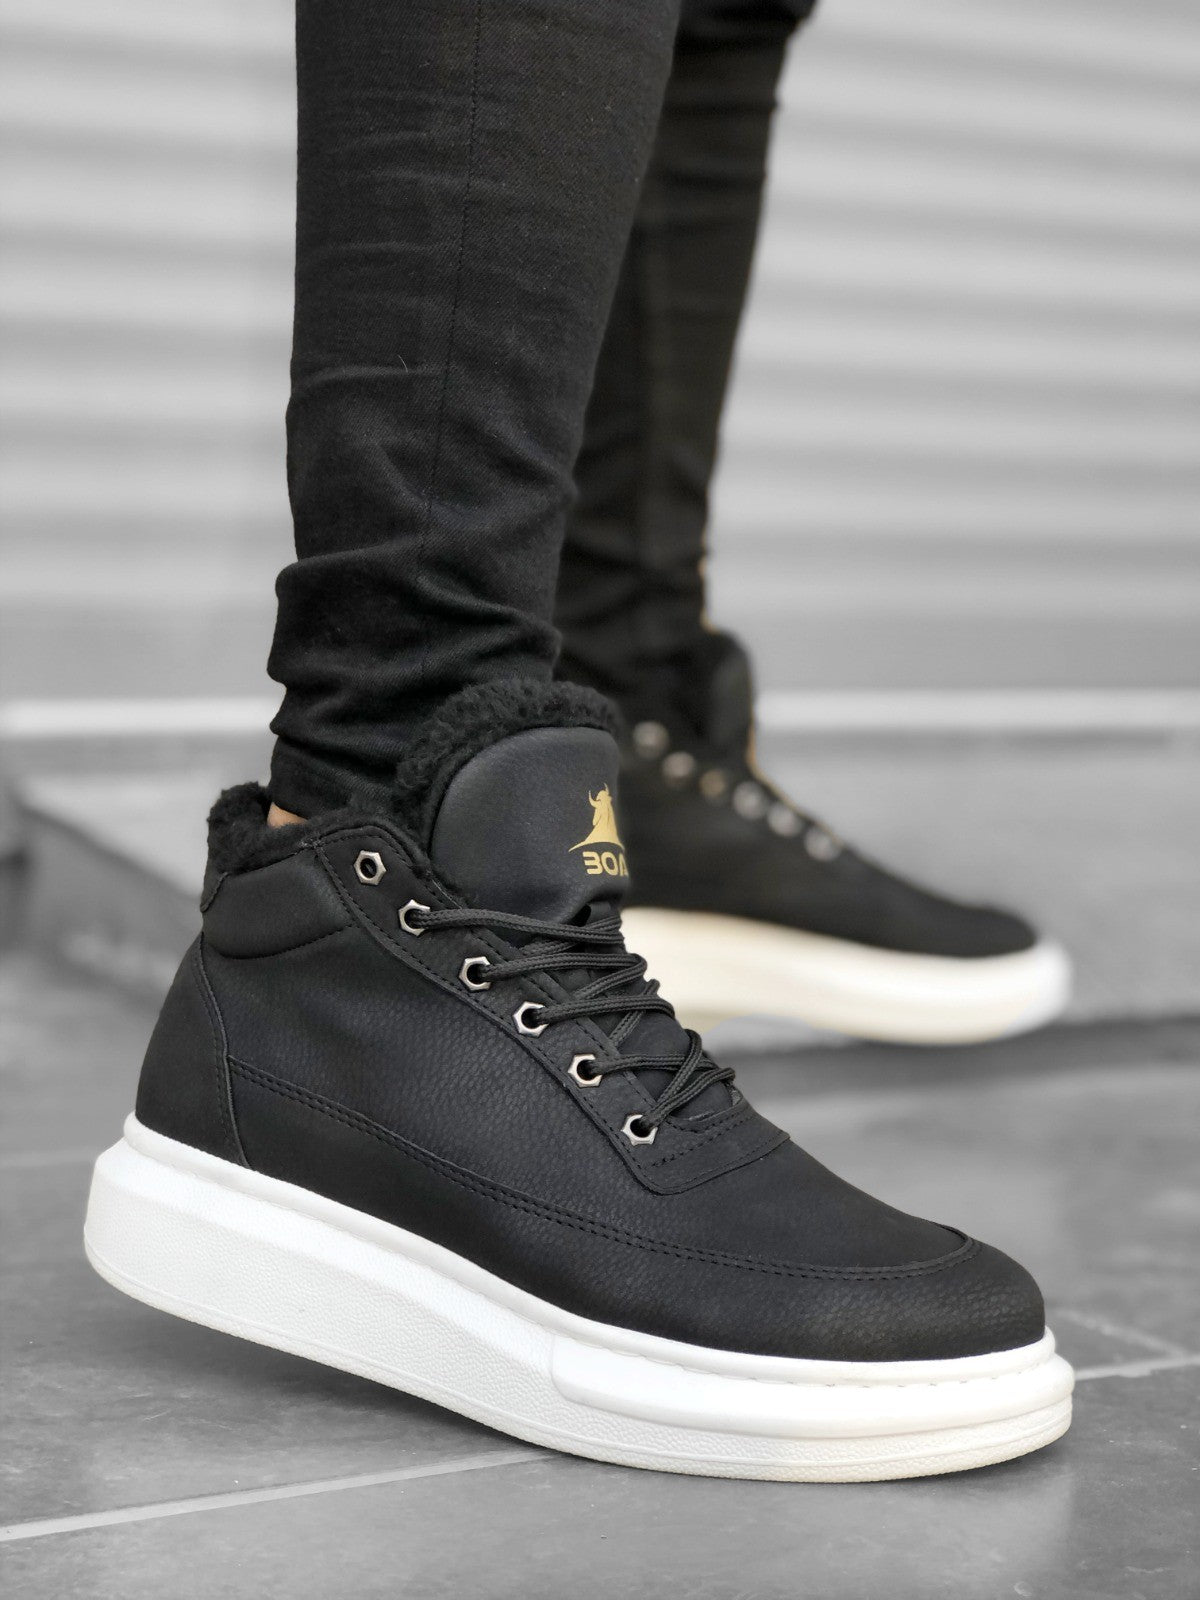 BA0151 Shearling Lace-up Men's Style Sports Boots - STREETMODE ™